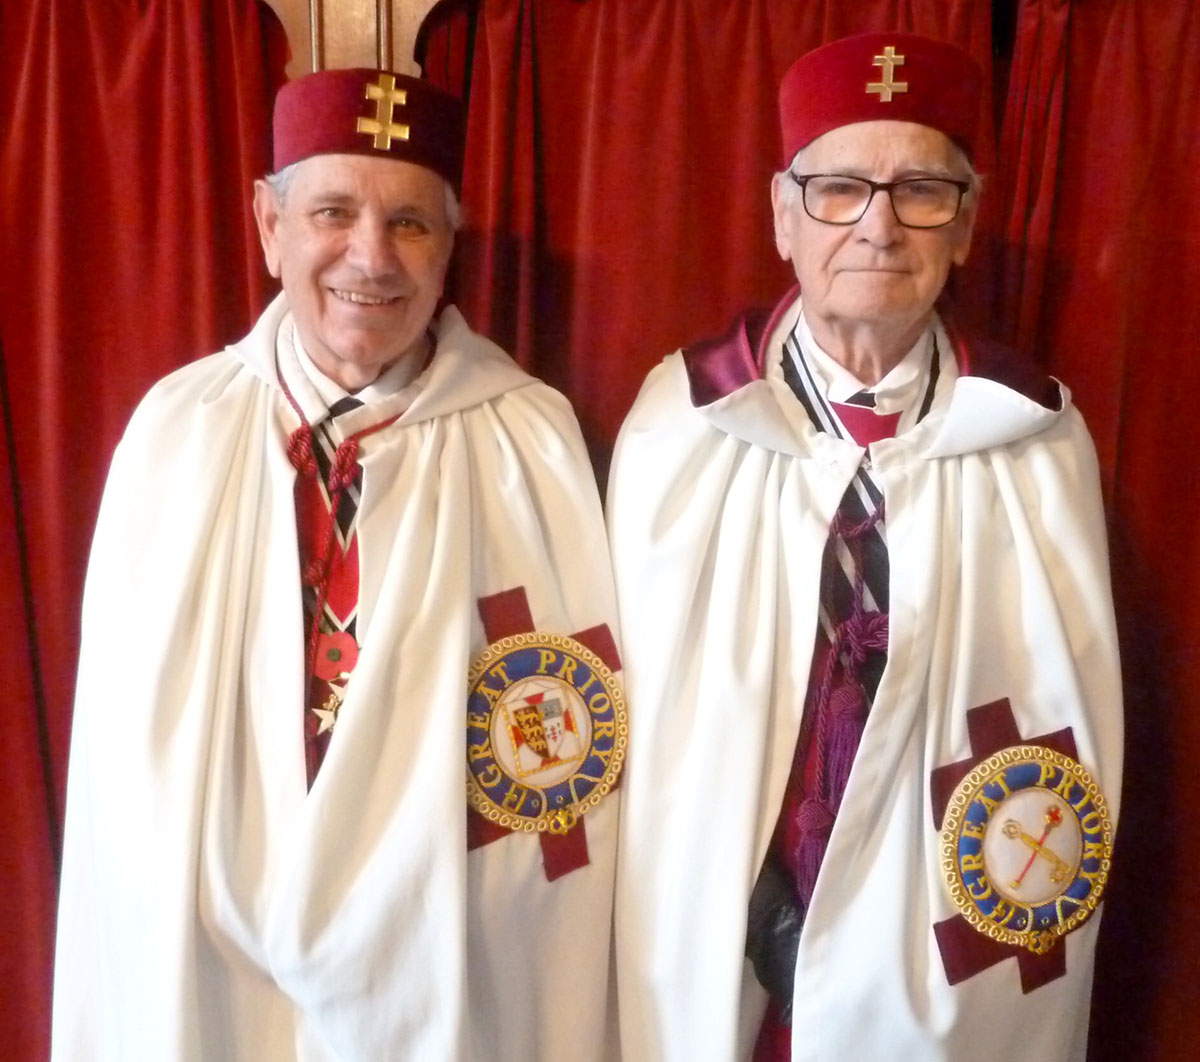 Provincial Church Service and Provincial Priory meeting for North and East Yorkshire